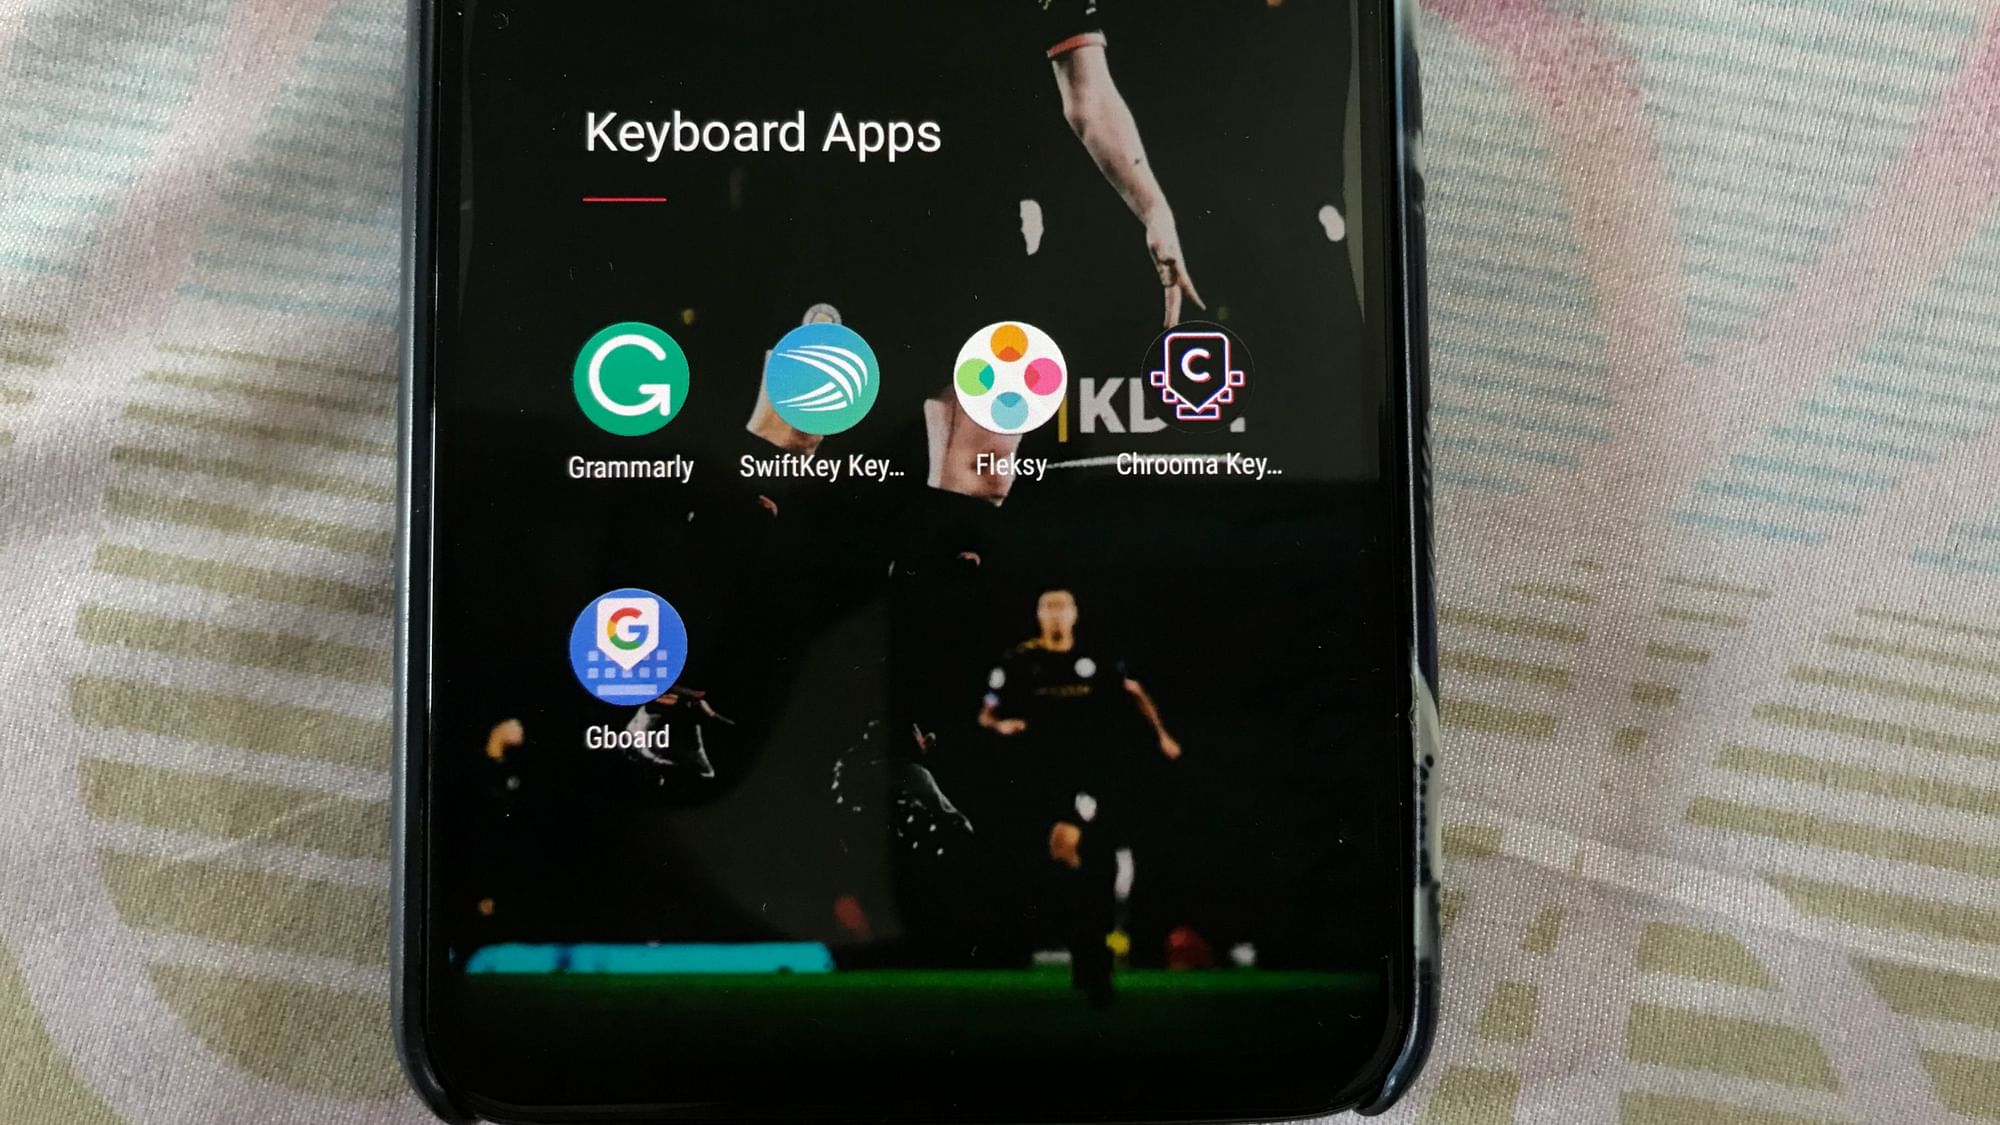 Top keyboard apps for Android and iOS.